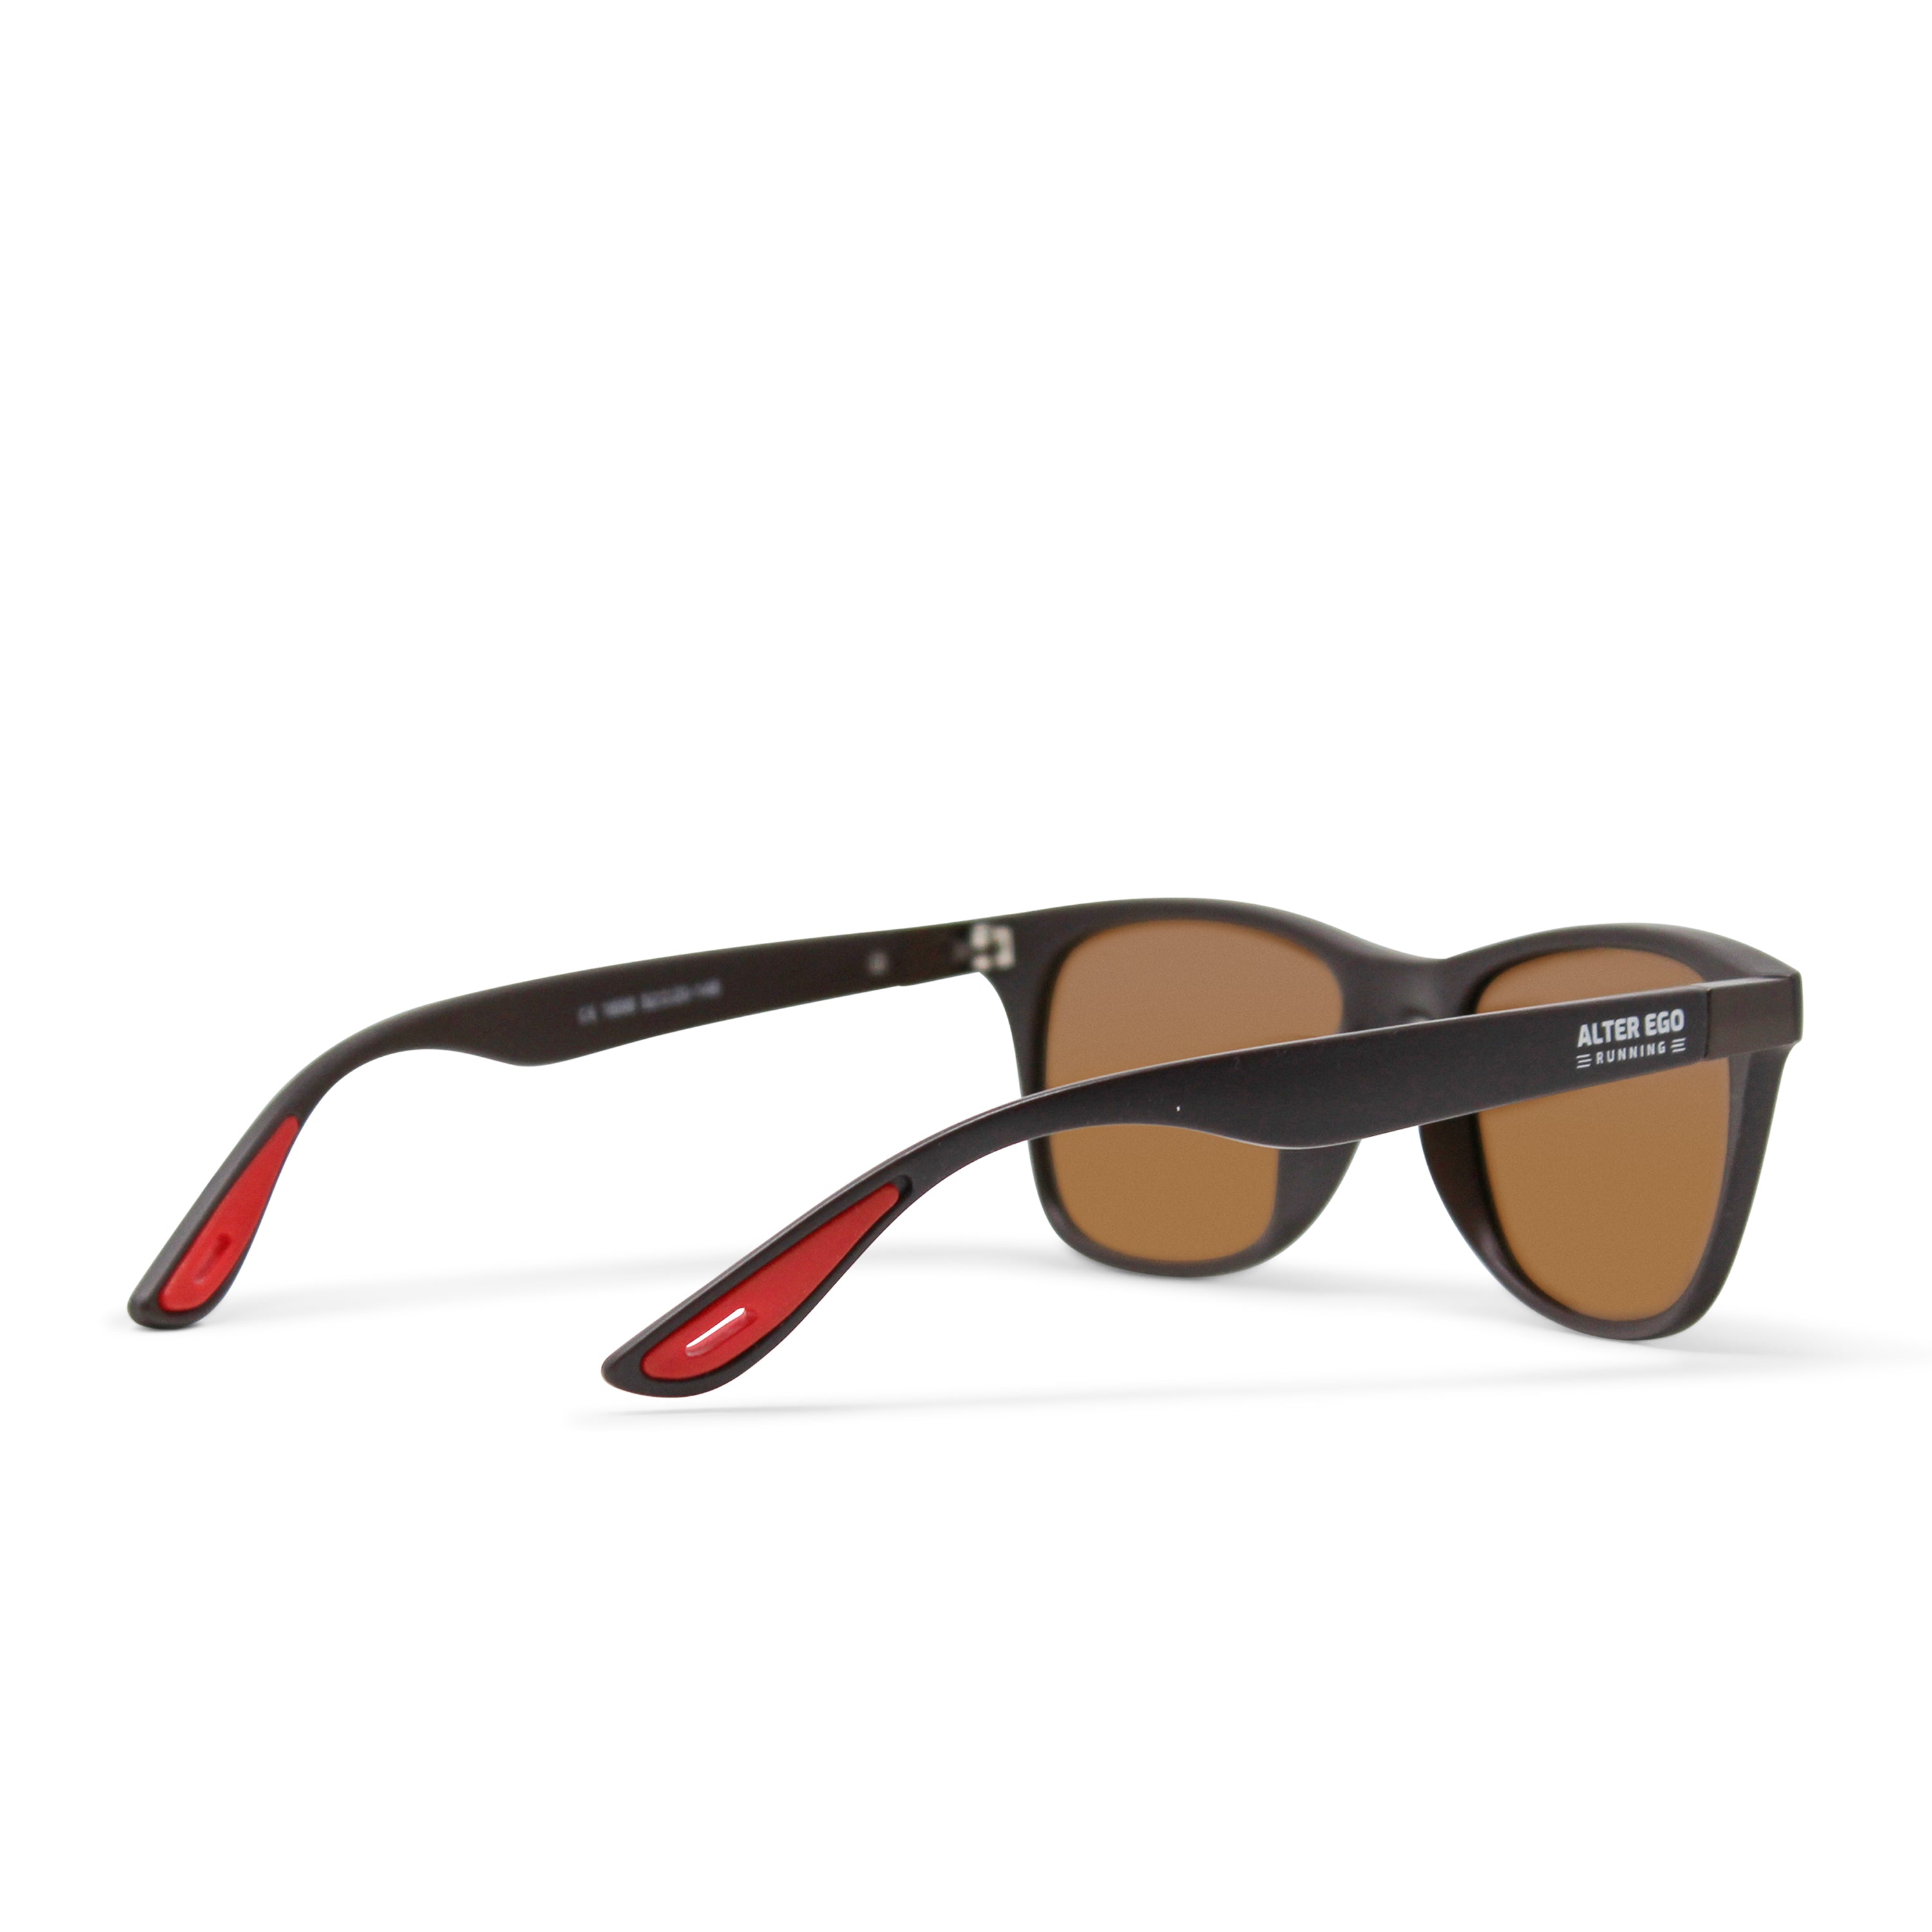 RUN Sunnies - Brown Frame | Brown Polarized Lenses | Red Elements